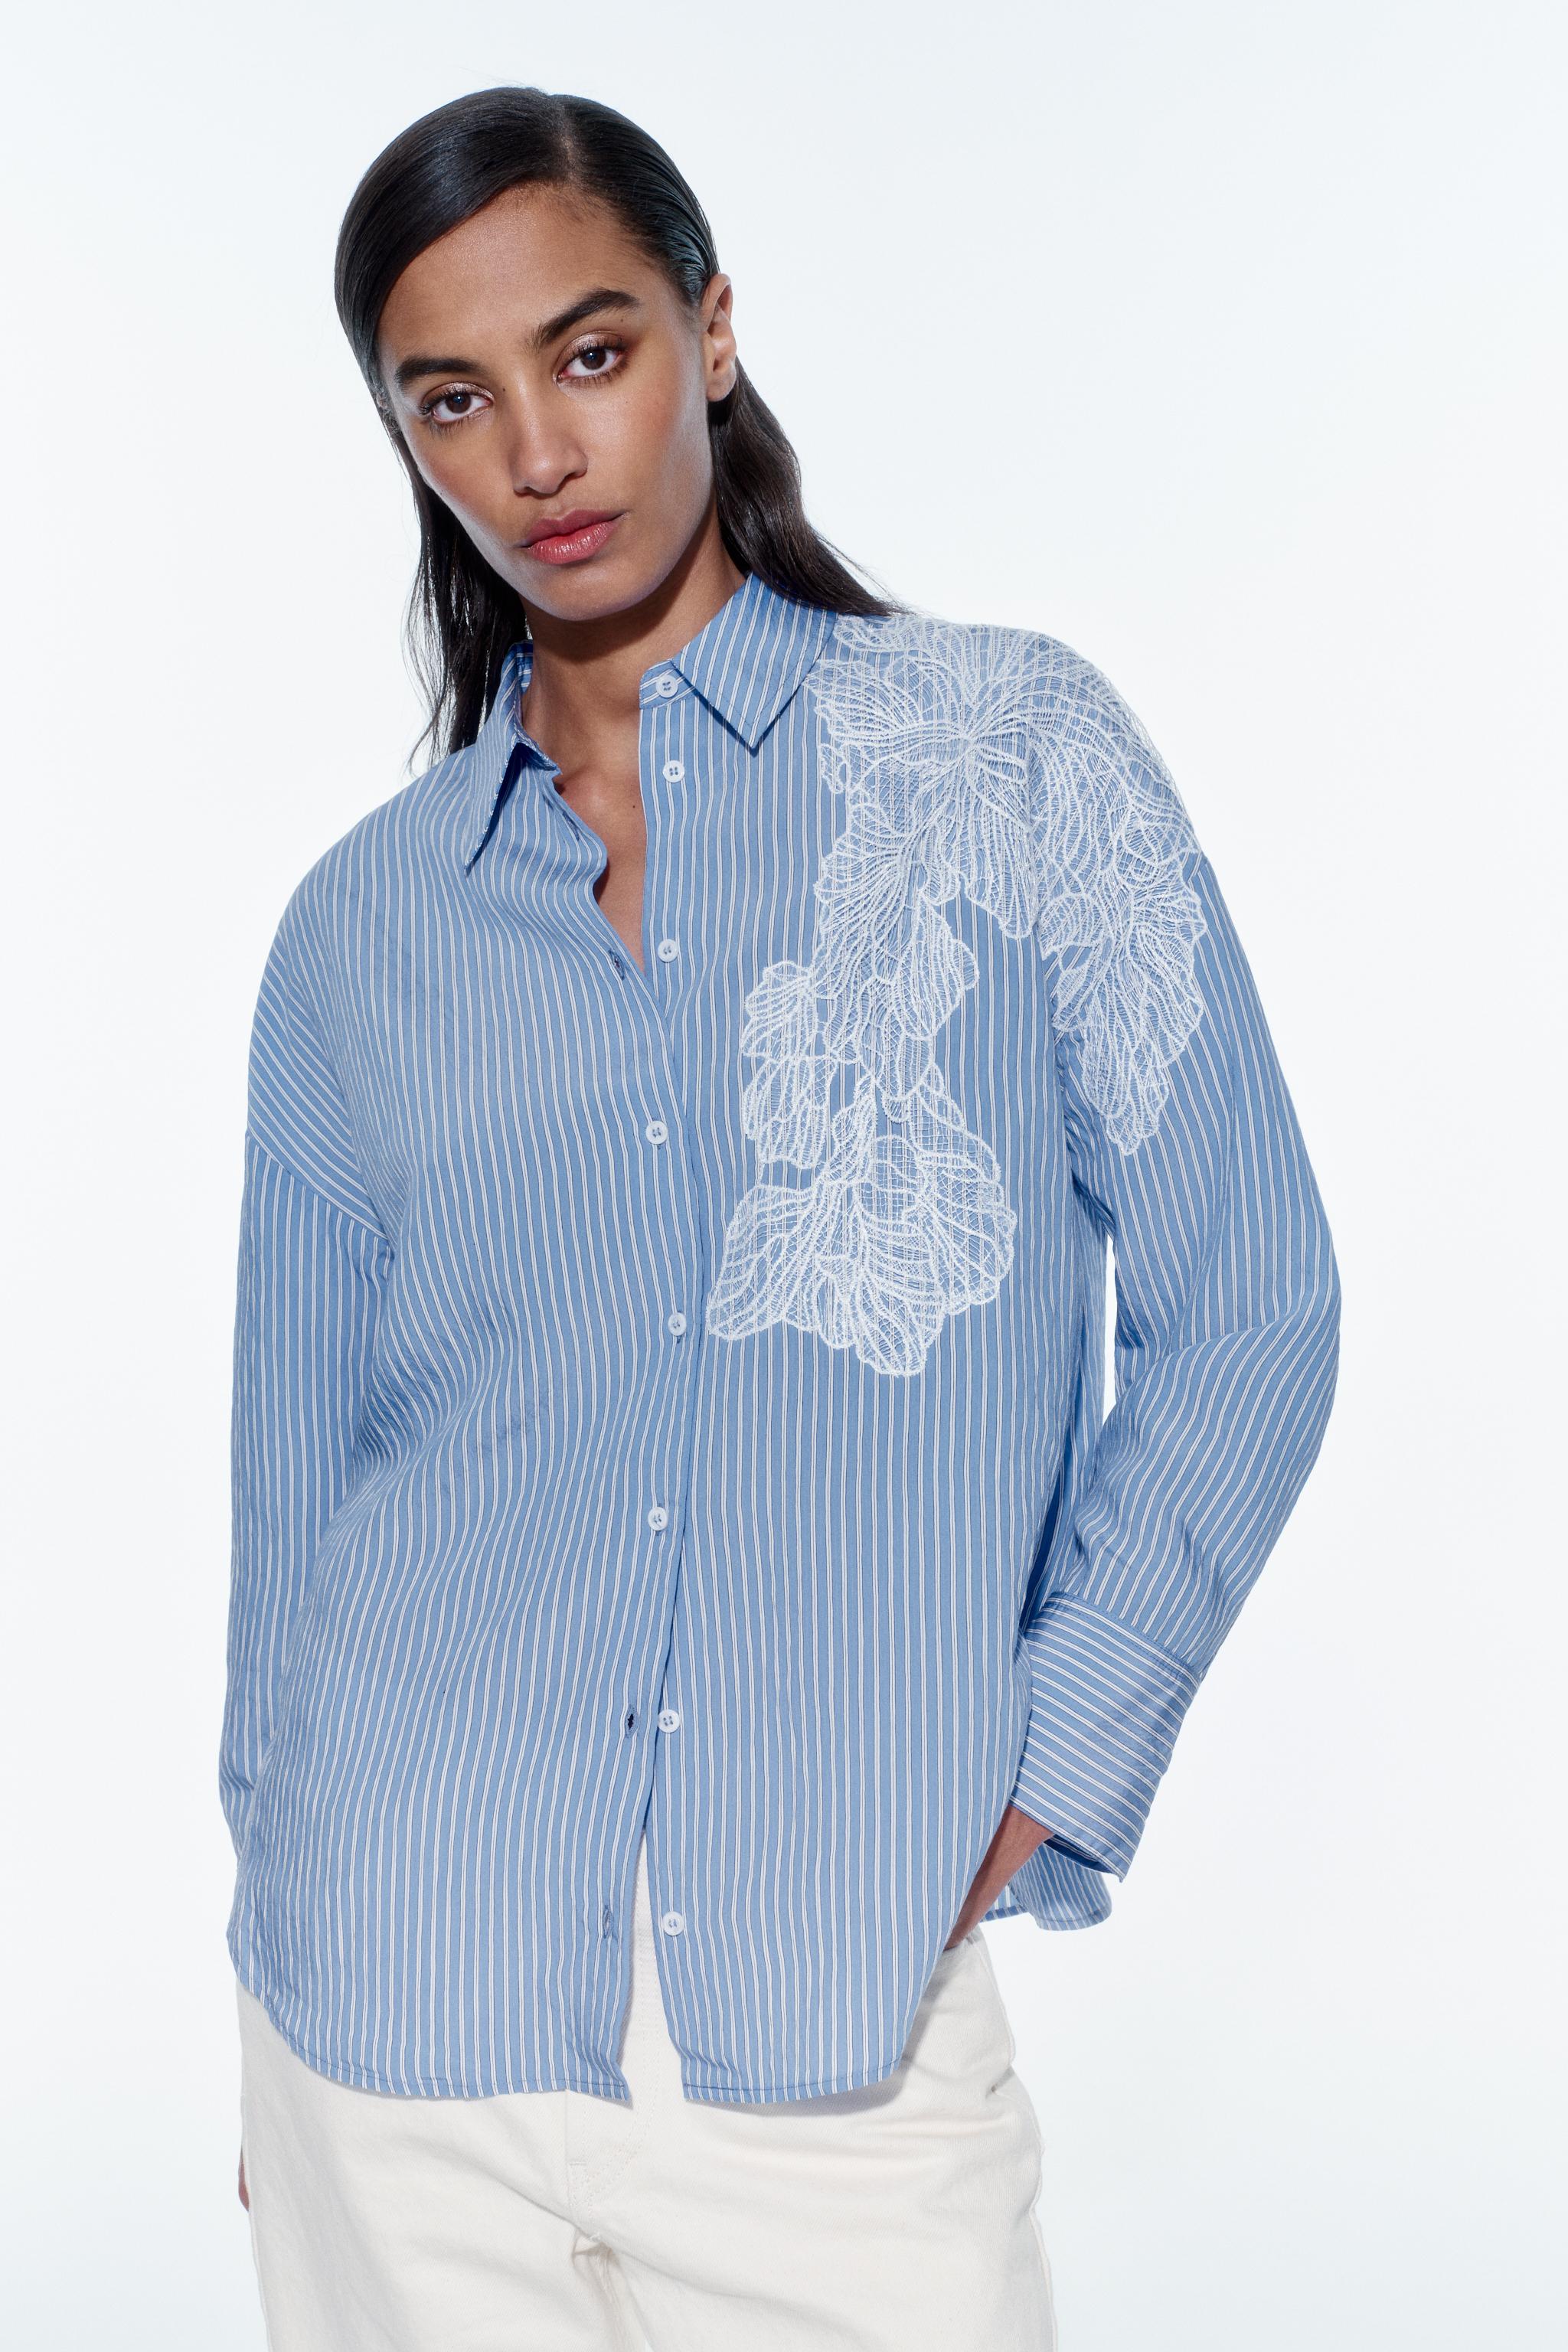 EMBROIDERED FLOWER STRIPED SHIRT